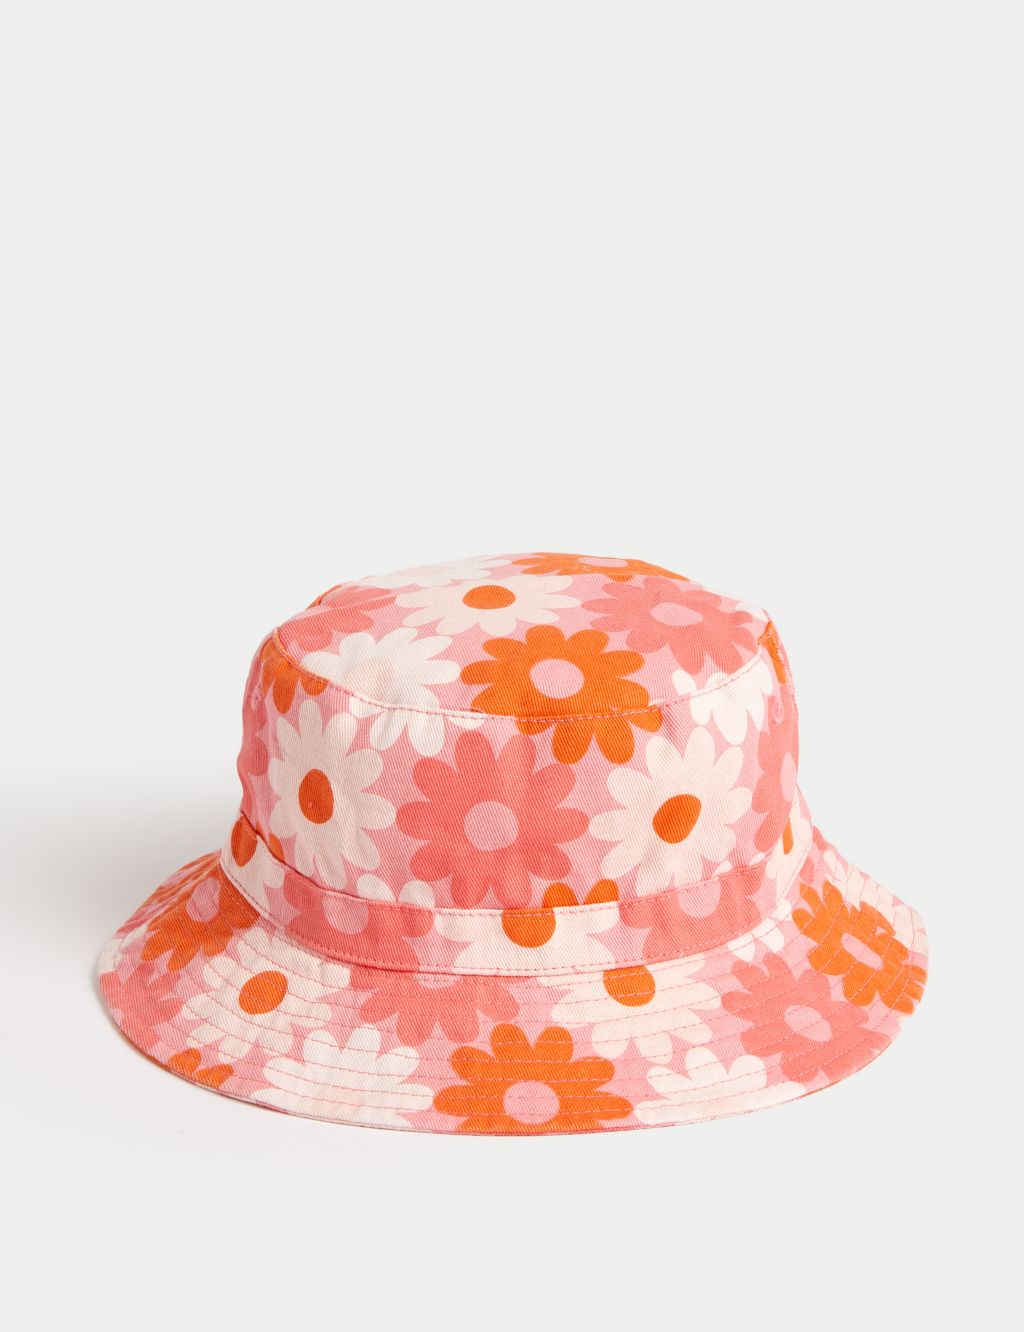 Kids' Pure Cotton Sun Hat (12 Months - 13 Years) image 1